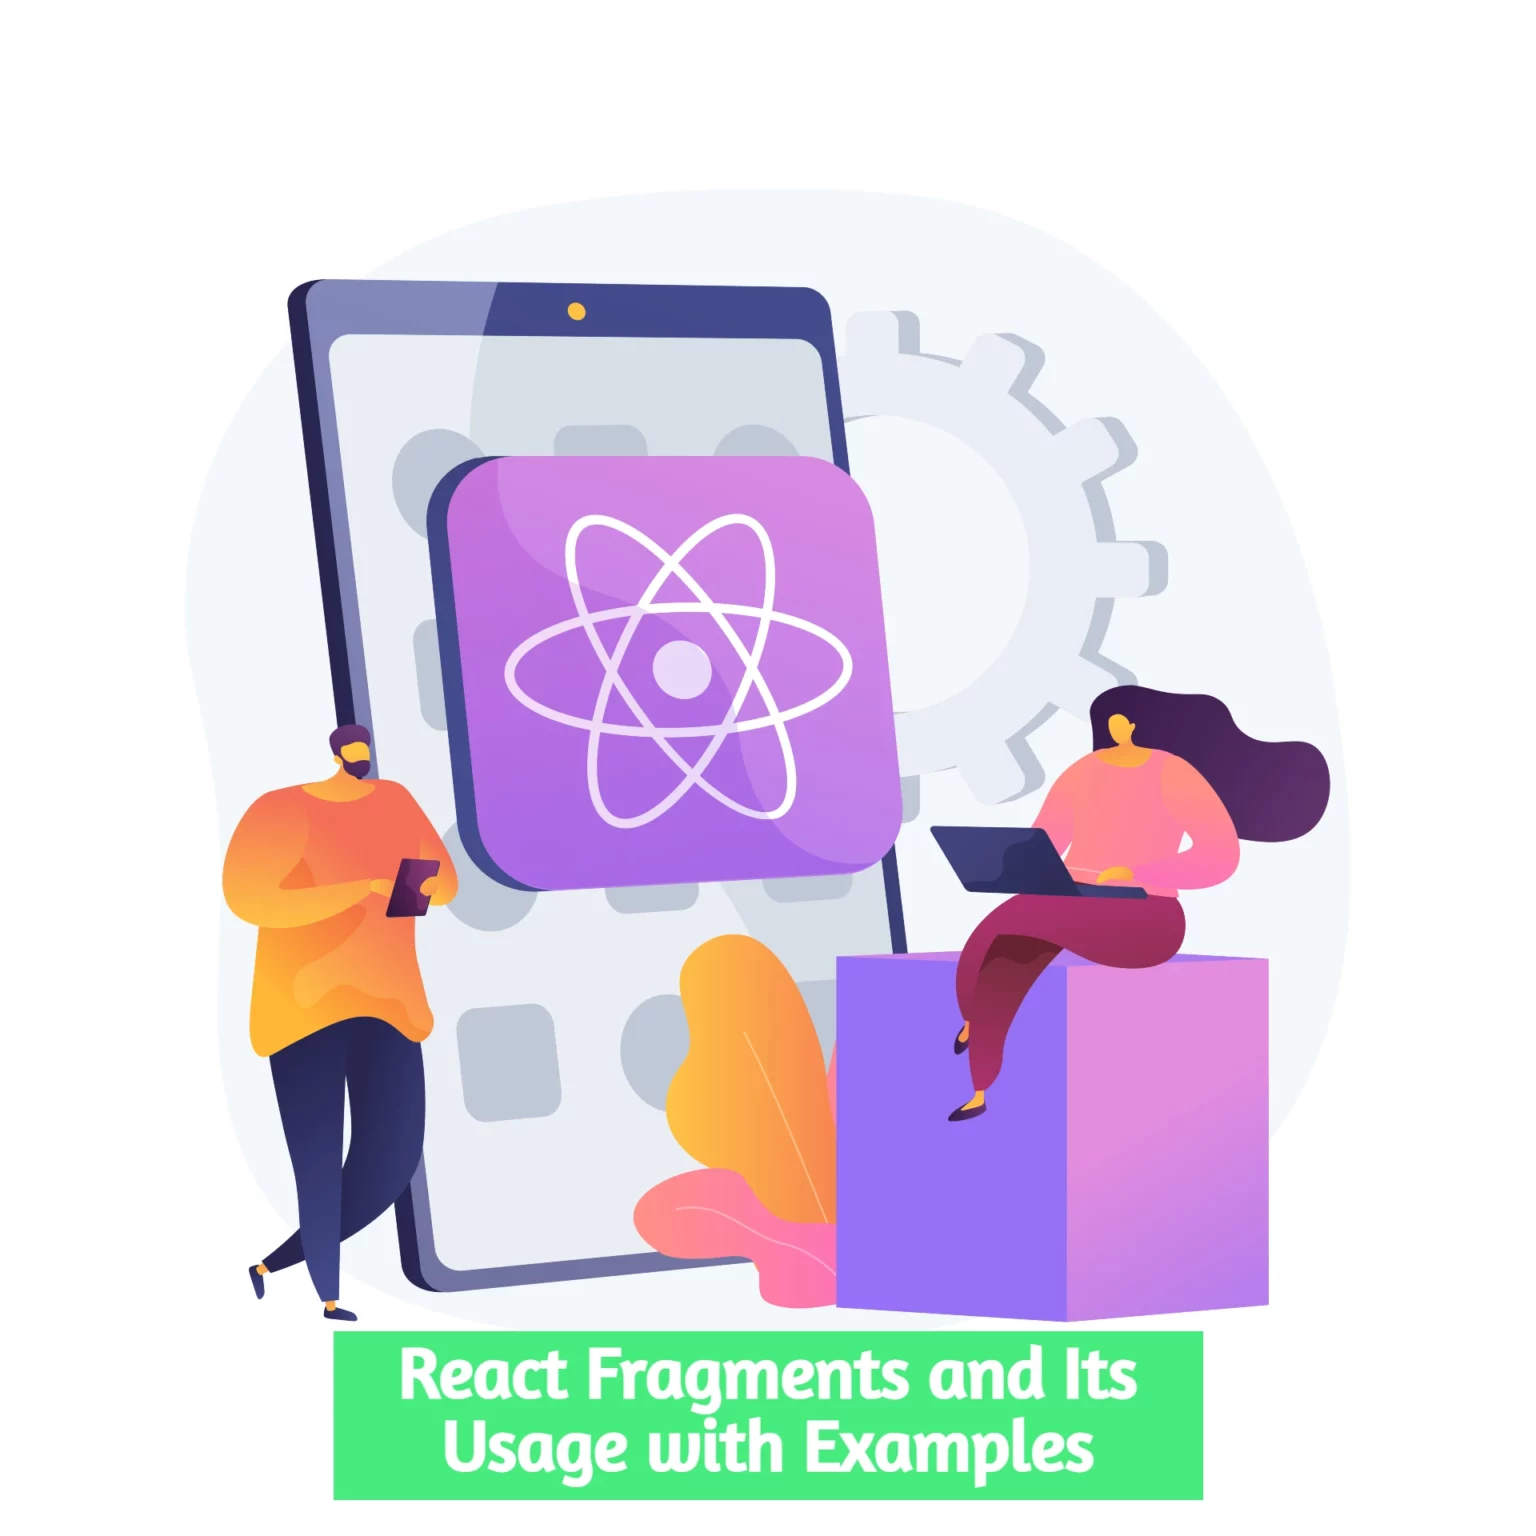 React Fragments and Its Usage with Examples